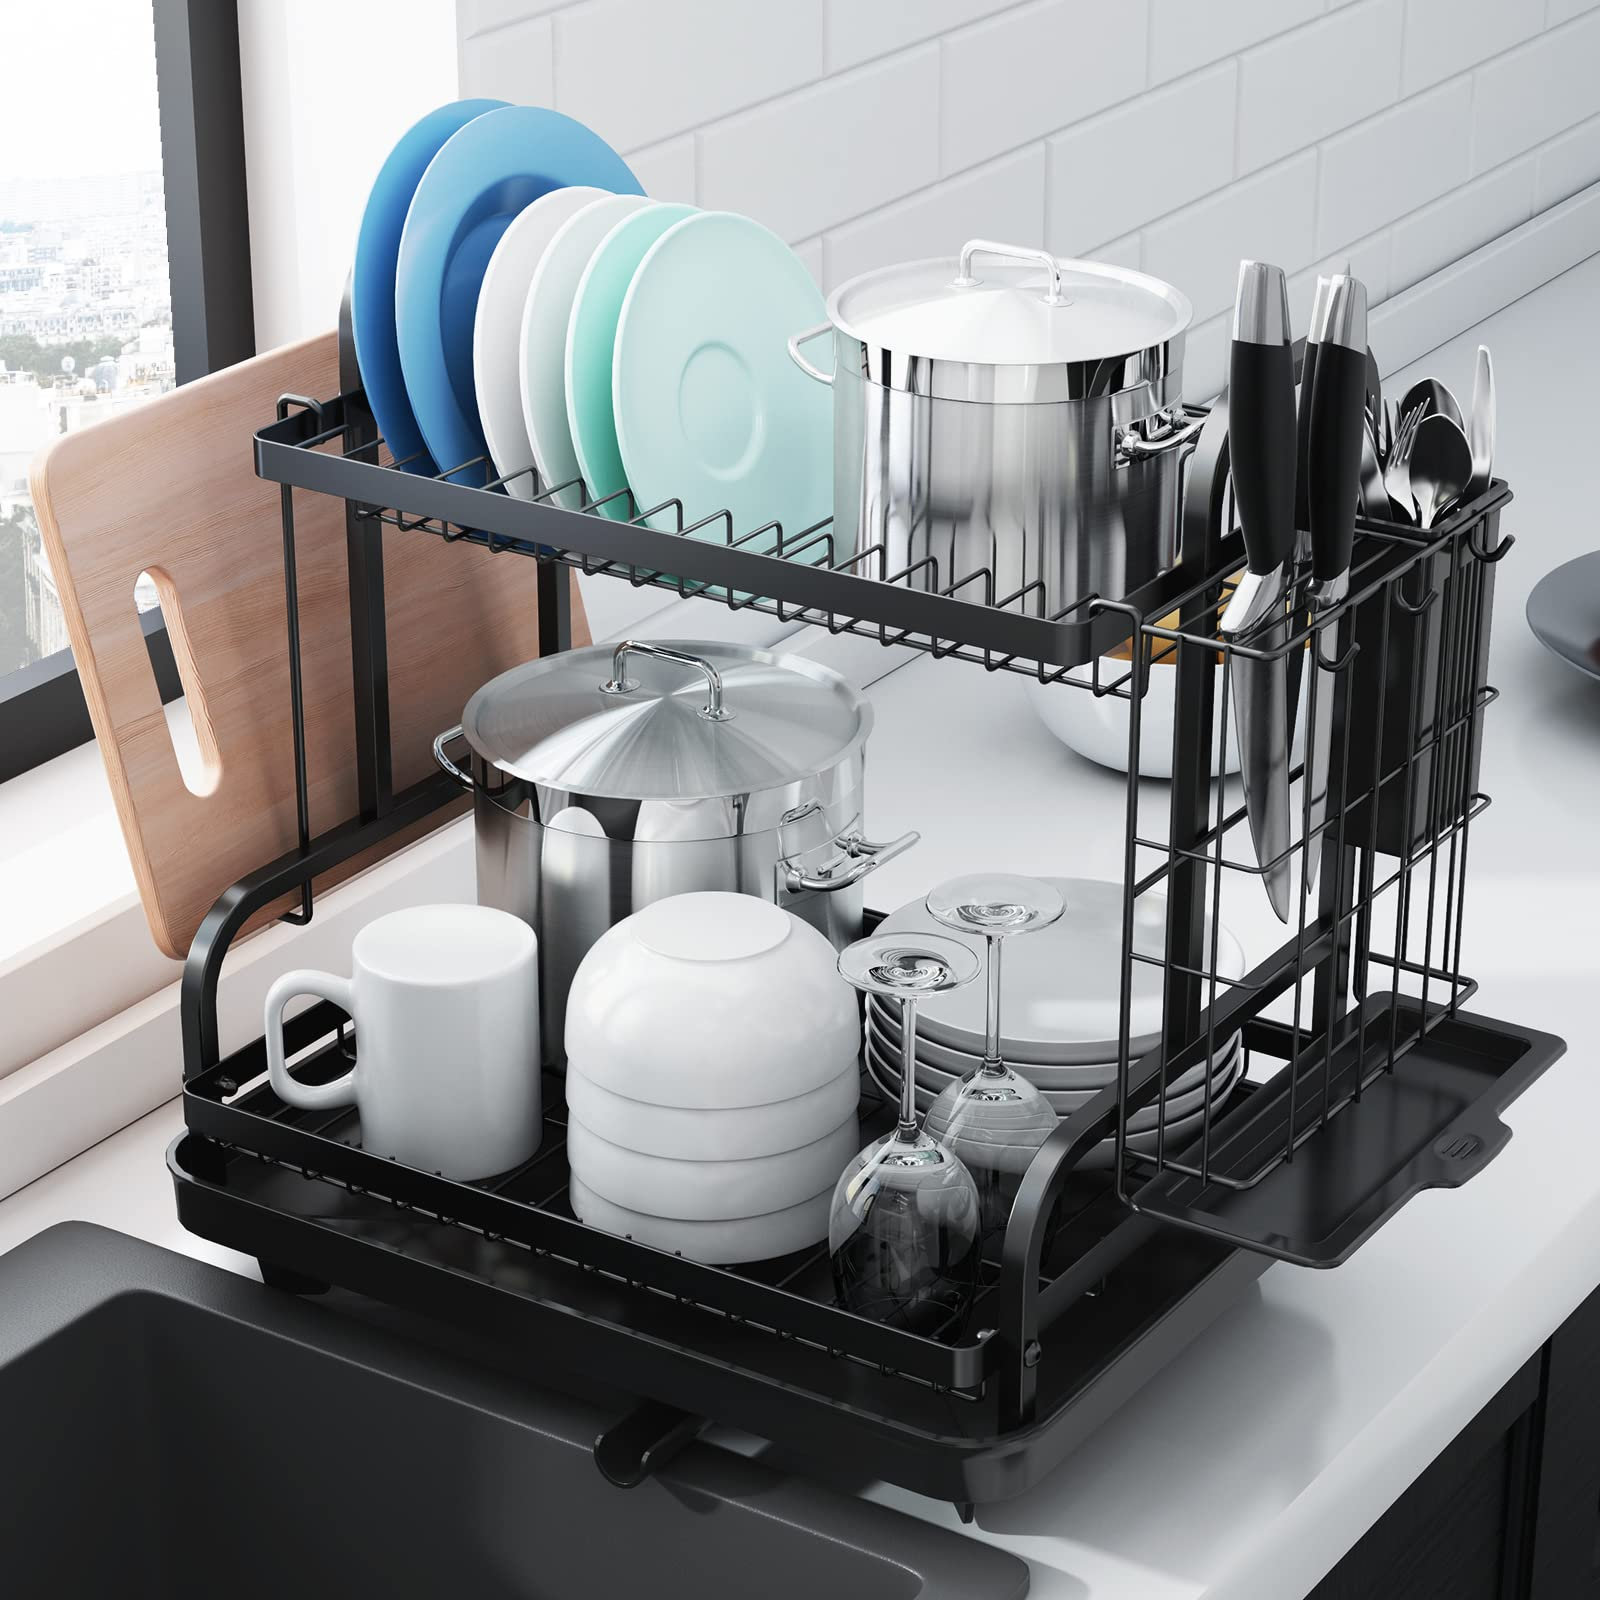 TGBY Large Dish Drying Stainless Steel 2 Tier Dish Rack